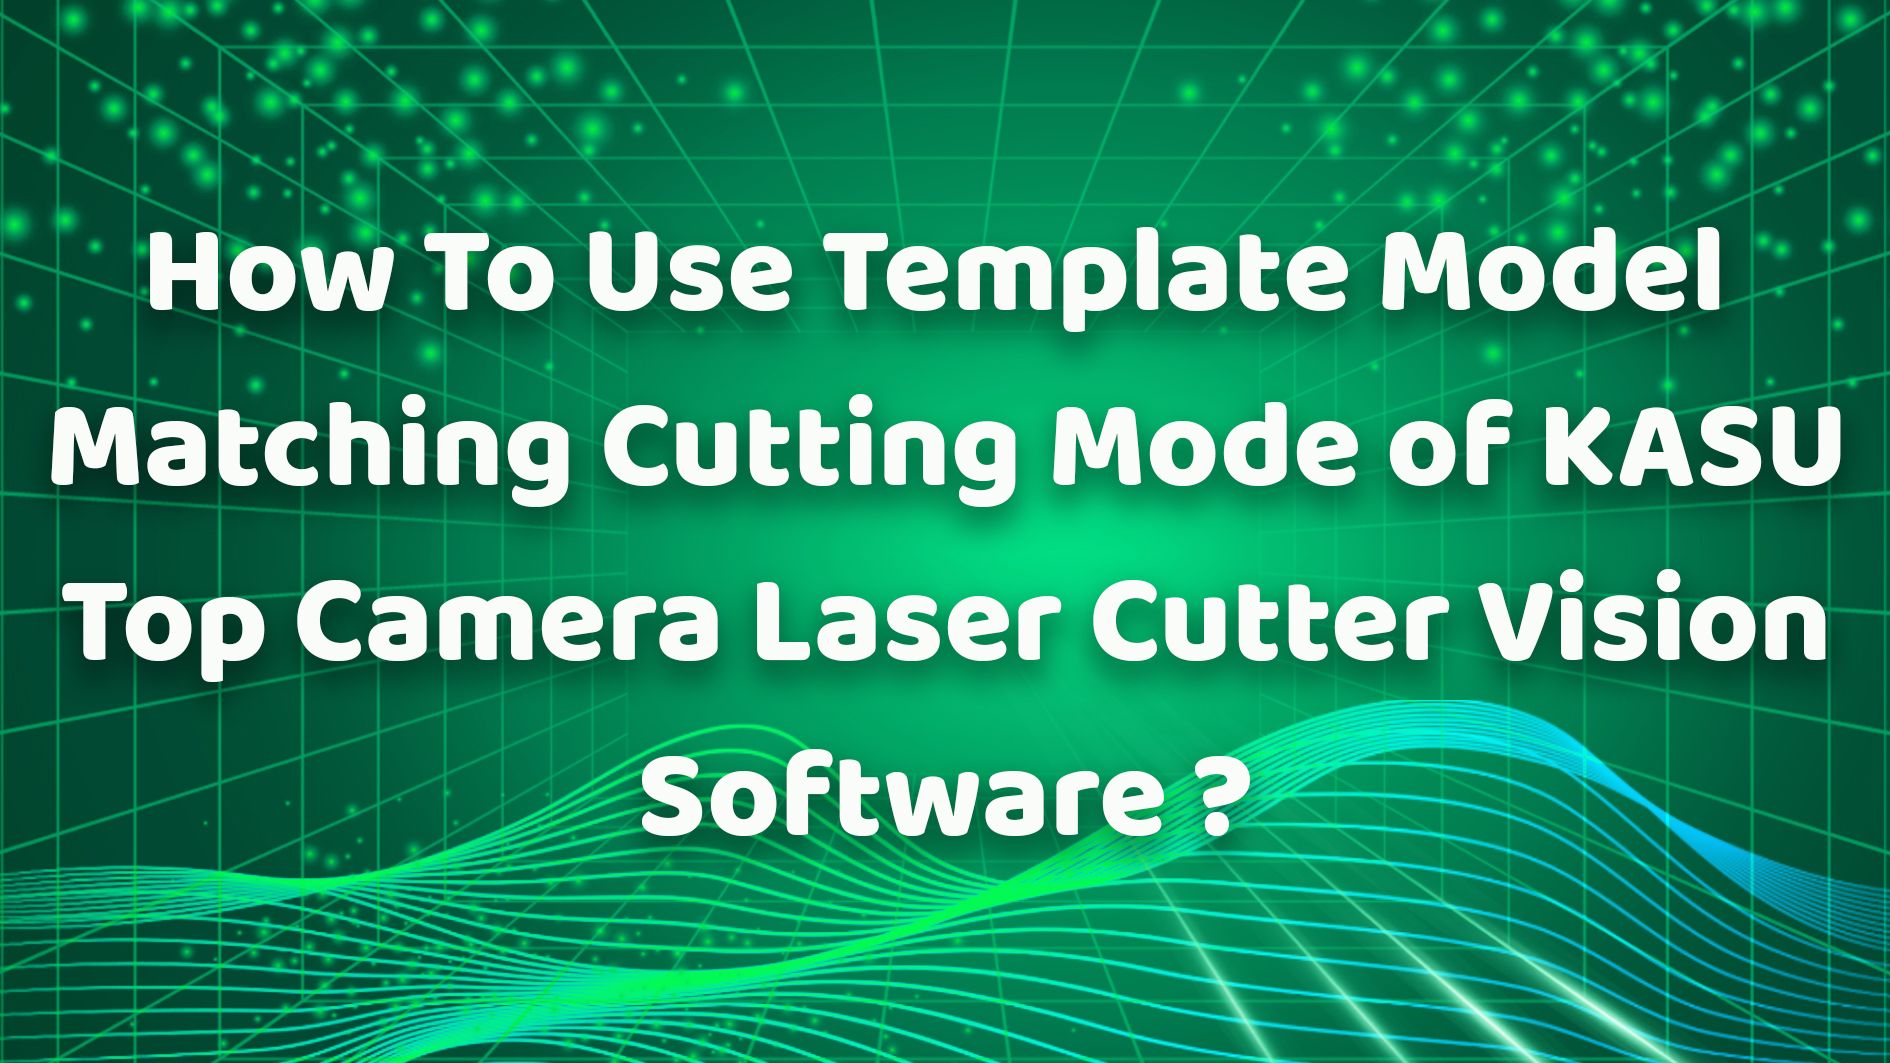 How To Use Template Model Matching Cutting Mode of KASU Top Camera Laser Cutter Vision Software？